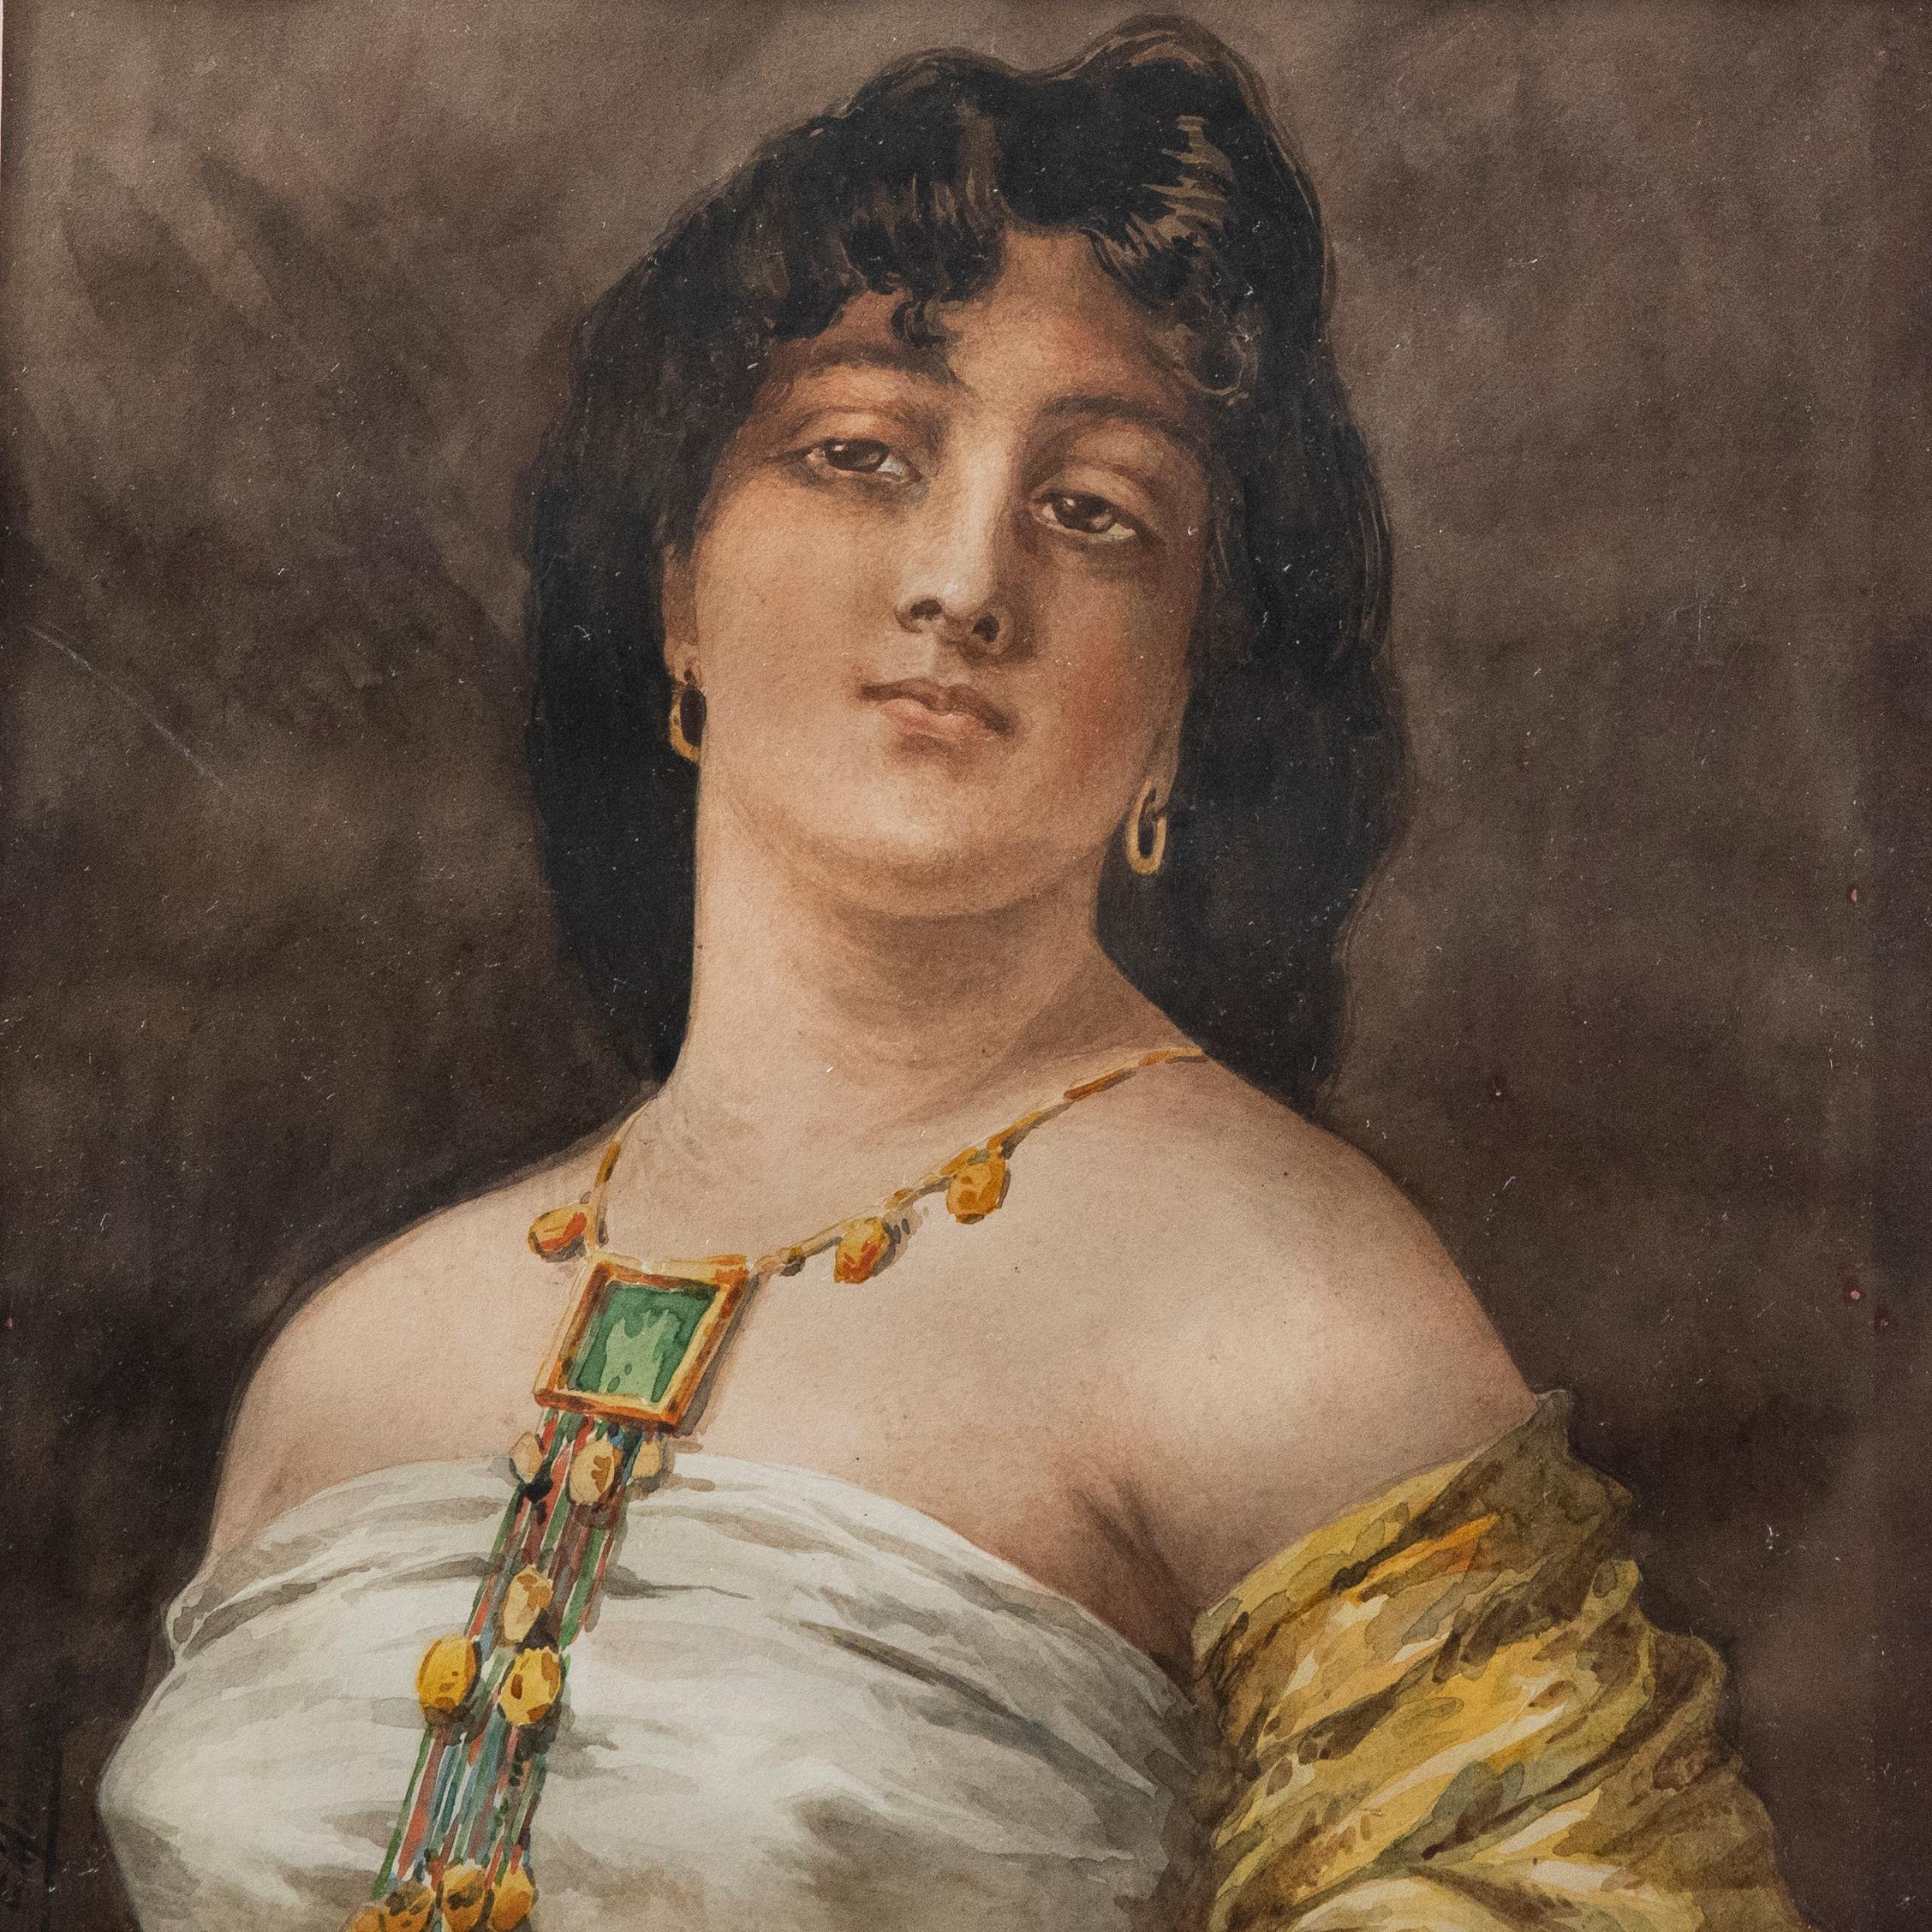 A charming portrait study of a Venetian woman. The composition captures the woman looking down at the viewer, standing in a proud stance. She wears a vibrant necklace that offsets her white dress against a dark background. Signed and dated to the